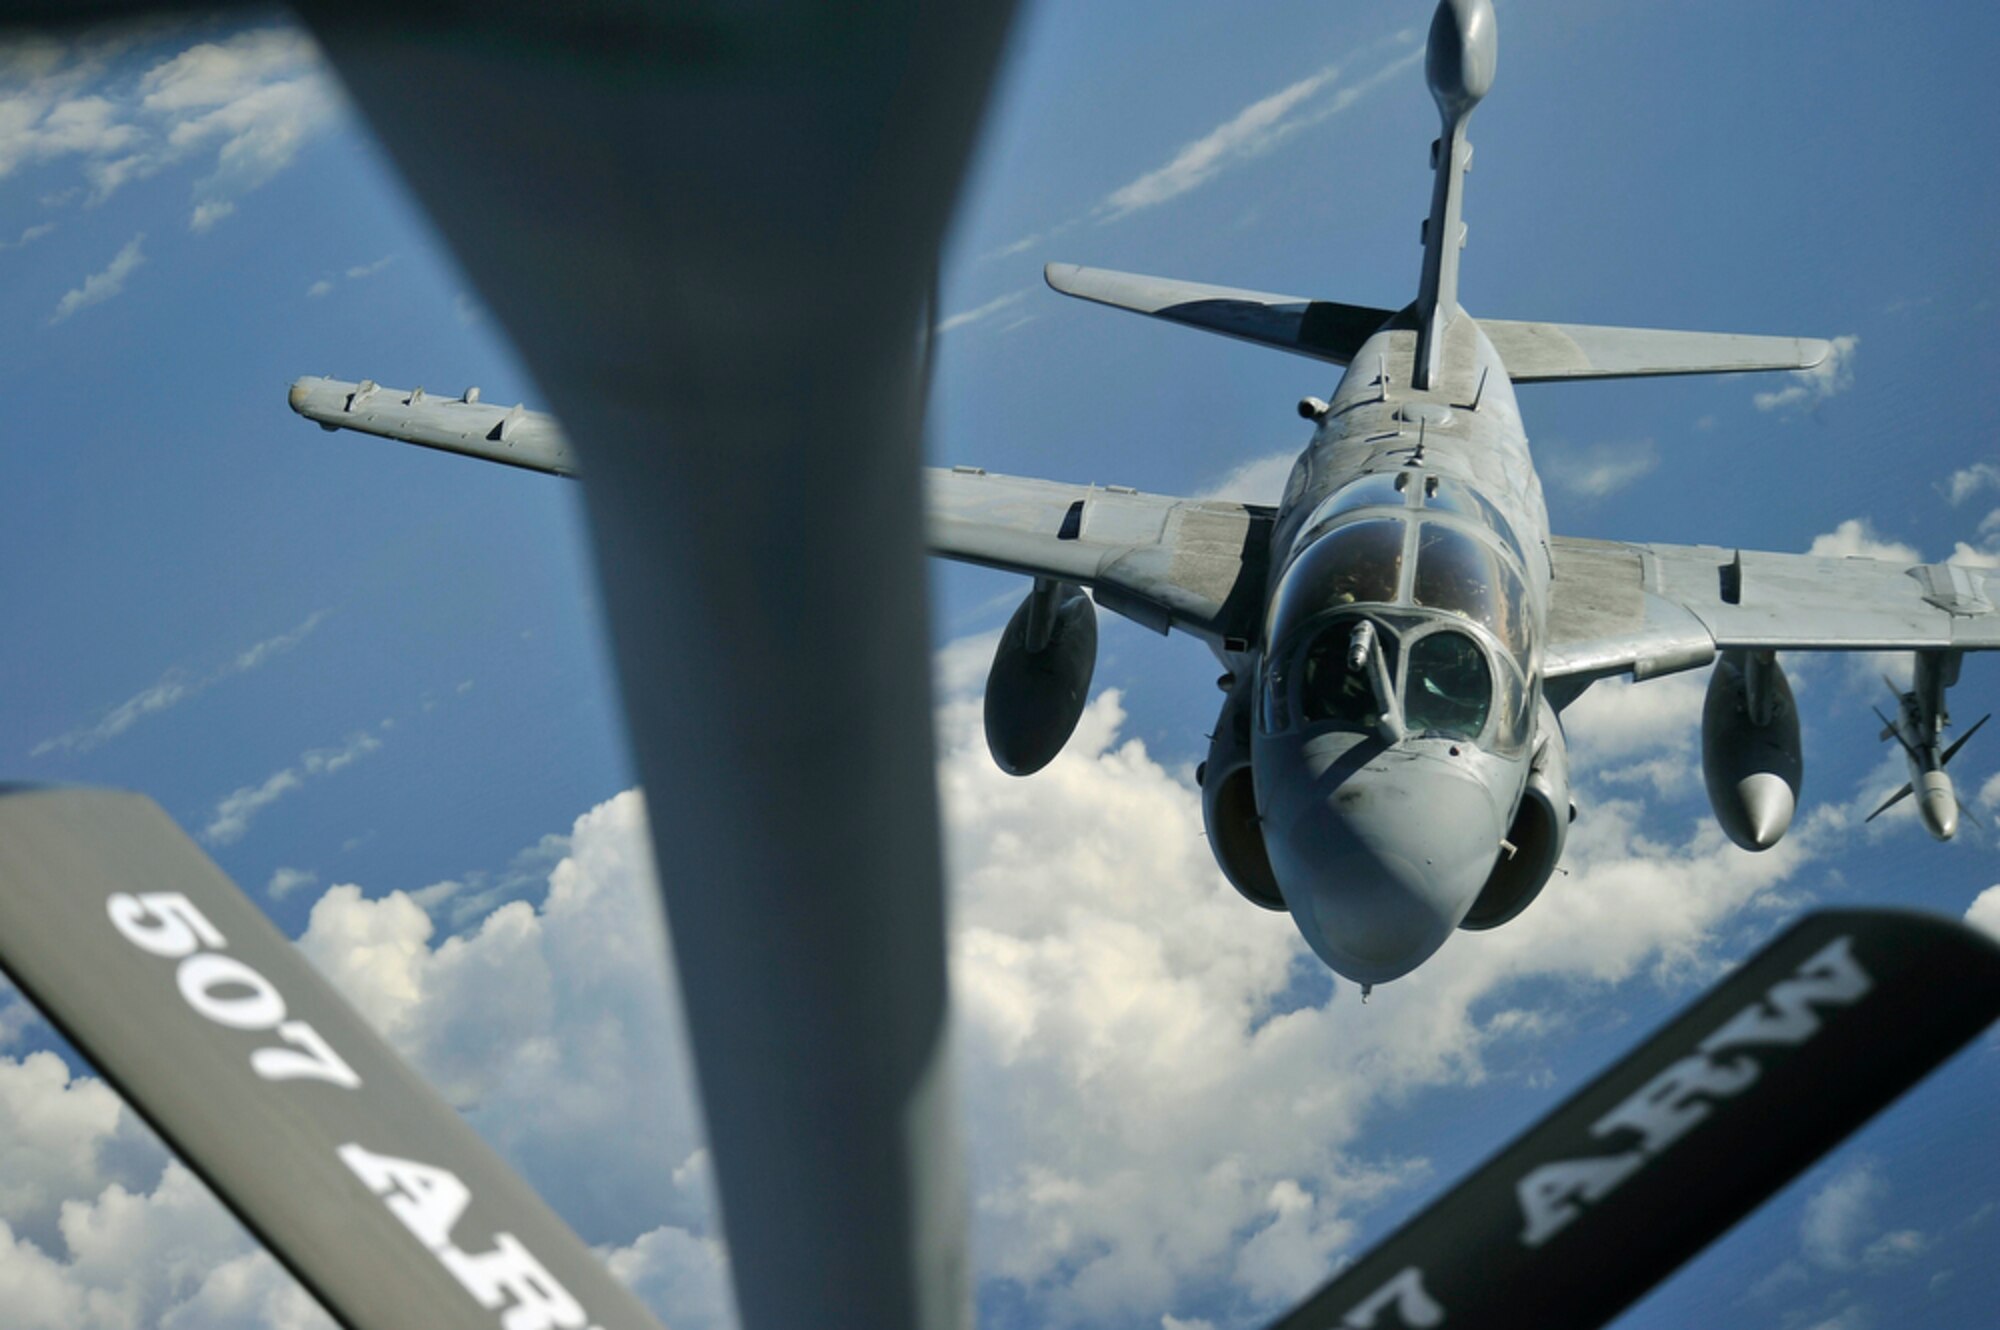 A U.S. Navy EA-6 Prowler flying over Hawaiian air space July 20, 2010, moves into position to receive fuel from a KC-135 Stratotanker from the 507th Air Refueling Wing at Tinker Air Force Base, Okla., during the Rim of the Pacific exercise. RIMPAC, the world's largest maritime exercise, is a biennial event which stresses interoperability among the 14 nations participating in the exercise. The tanker is staging out of Joint Base Pearl Harbor-Hickam, Hawaii.  (U.S.  Air Force photo/Tech Sgt. Cohen A. Young)
